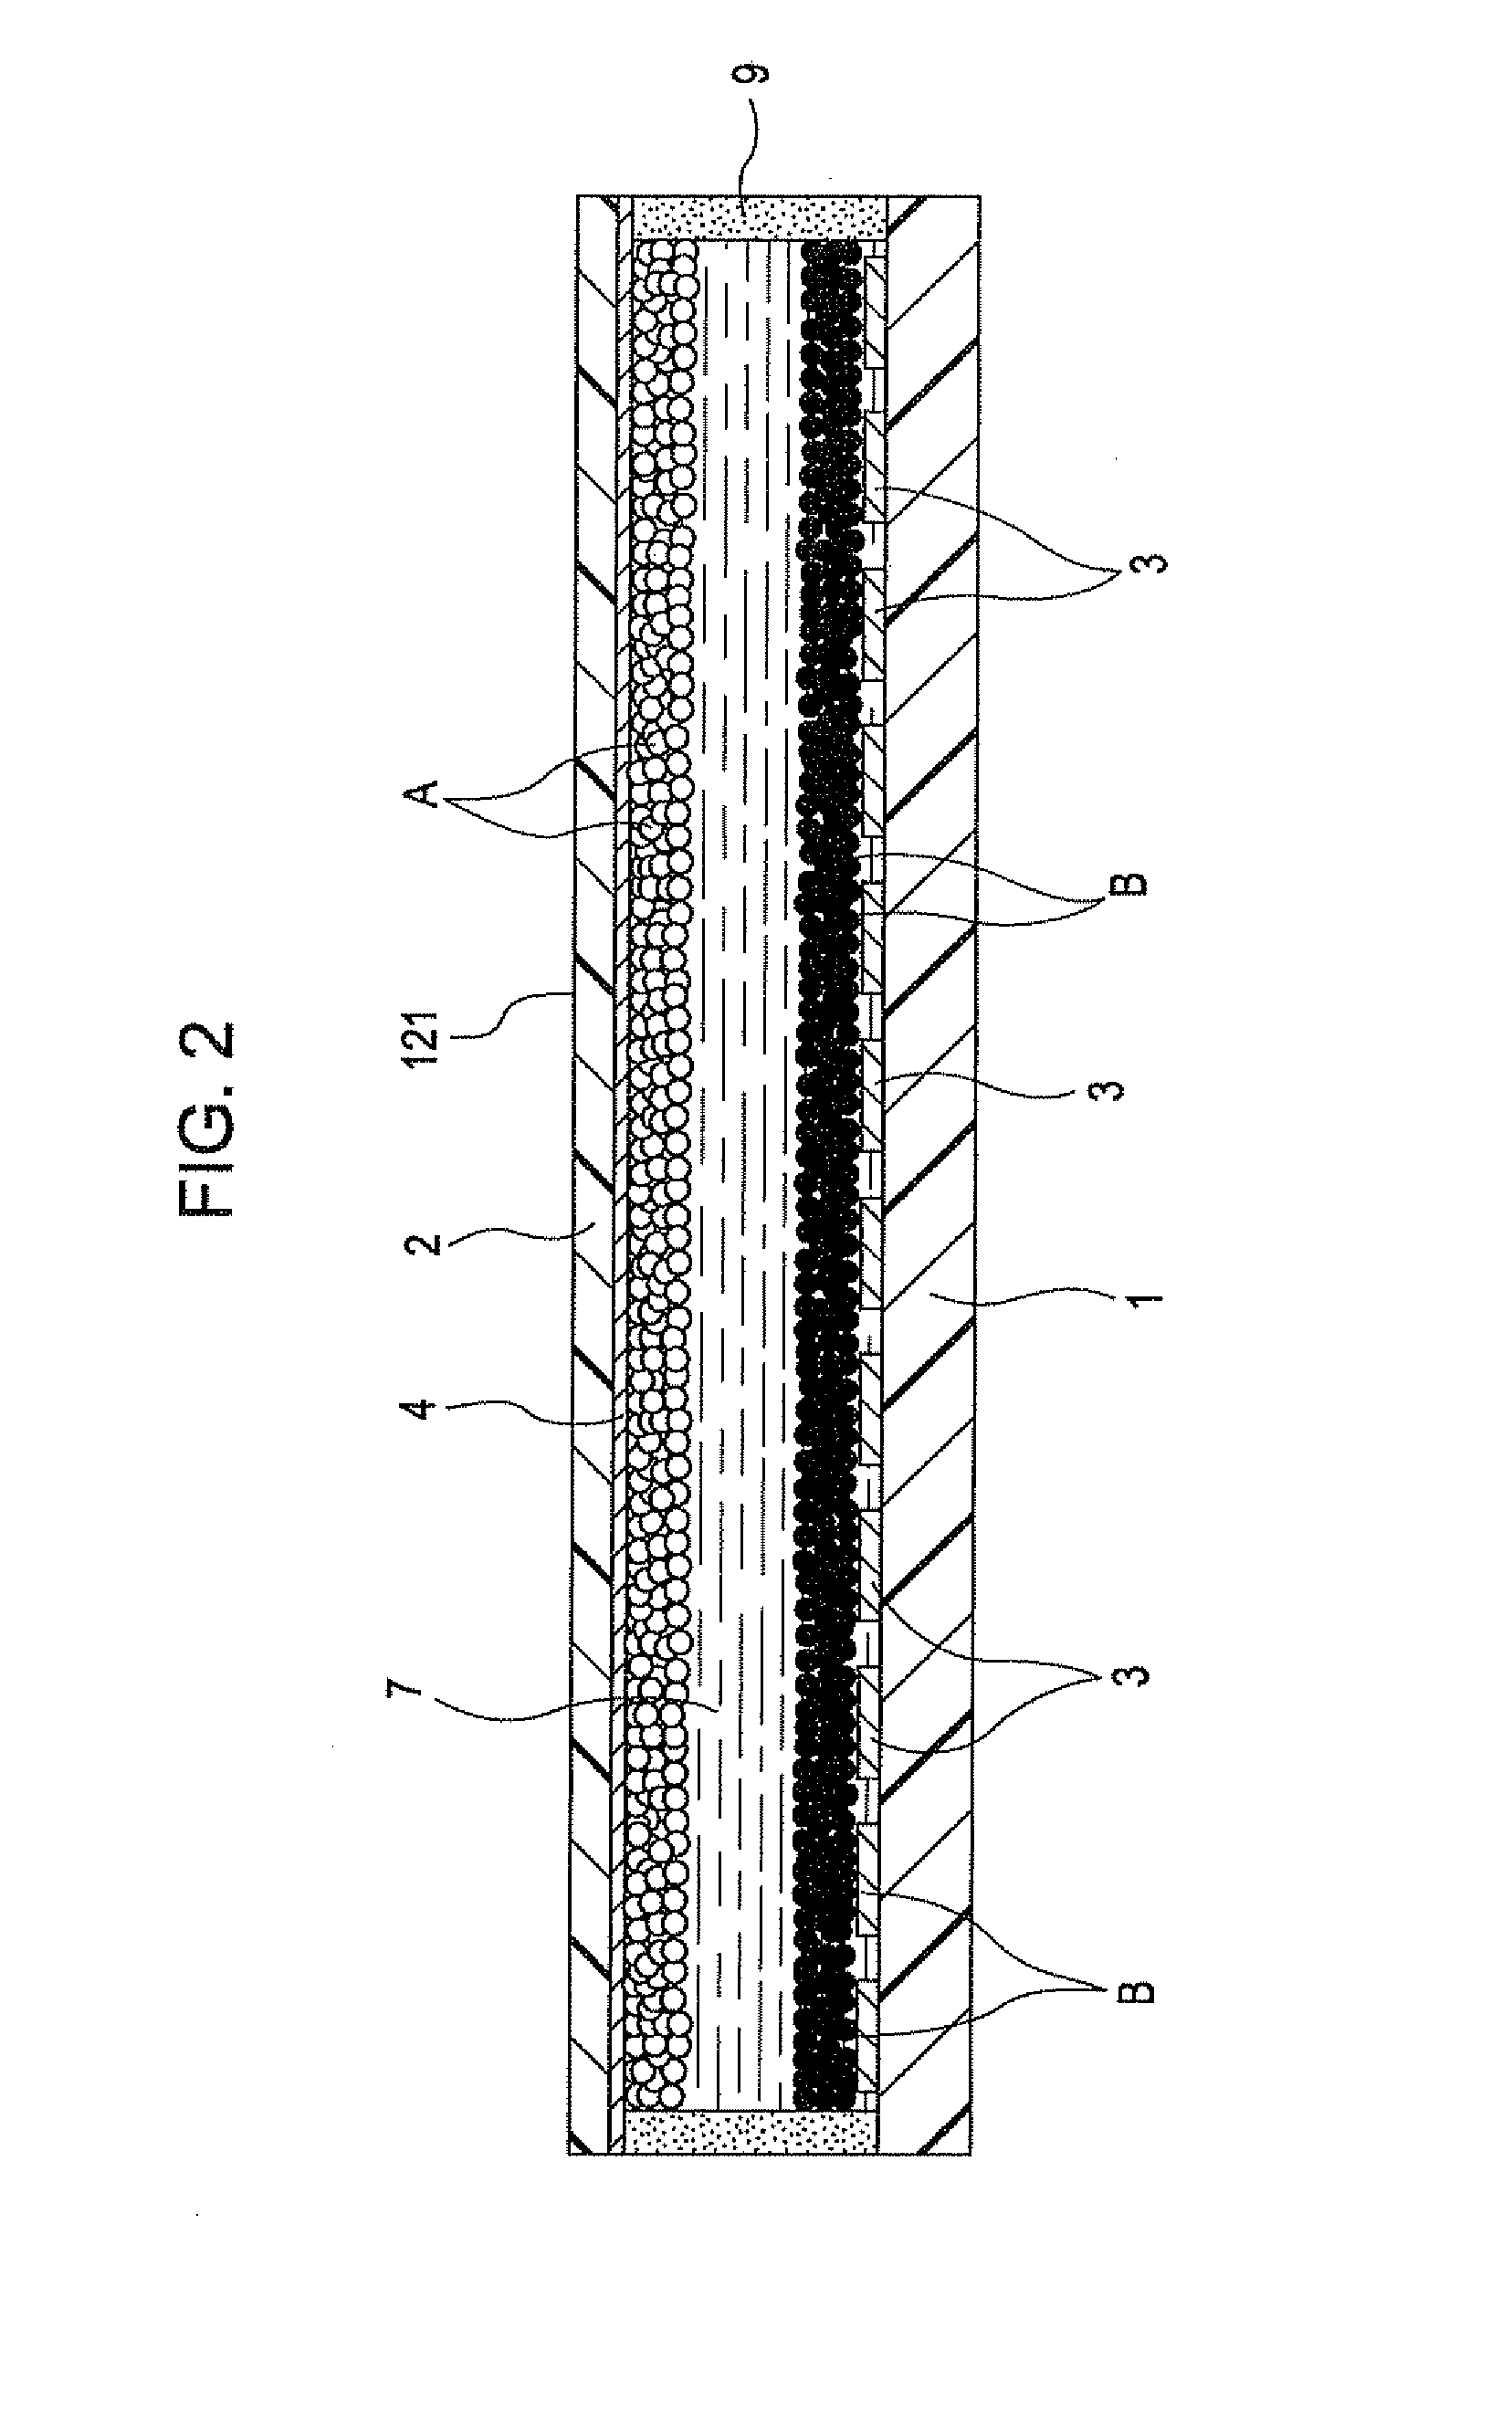 Display sheet, display device, and electronic apparatus